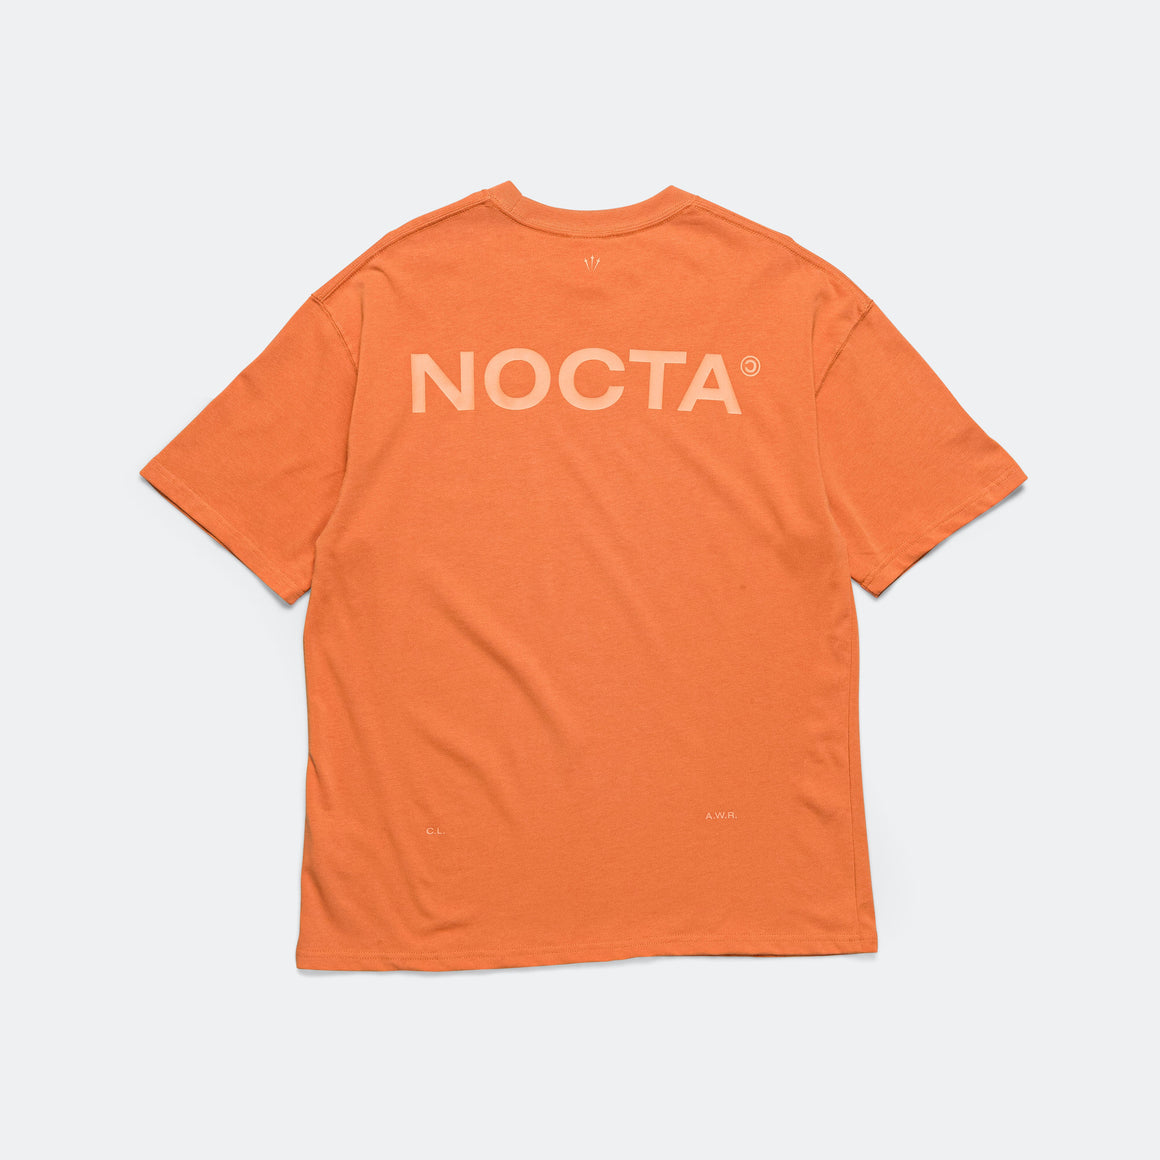 Nike - NOCTA CS SS Tee - Hot Curry/Orange Trance - UP THERE